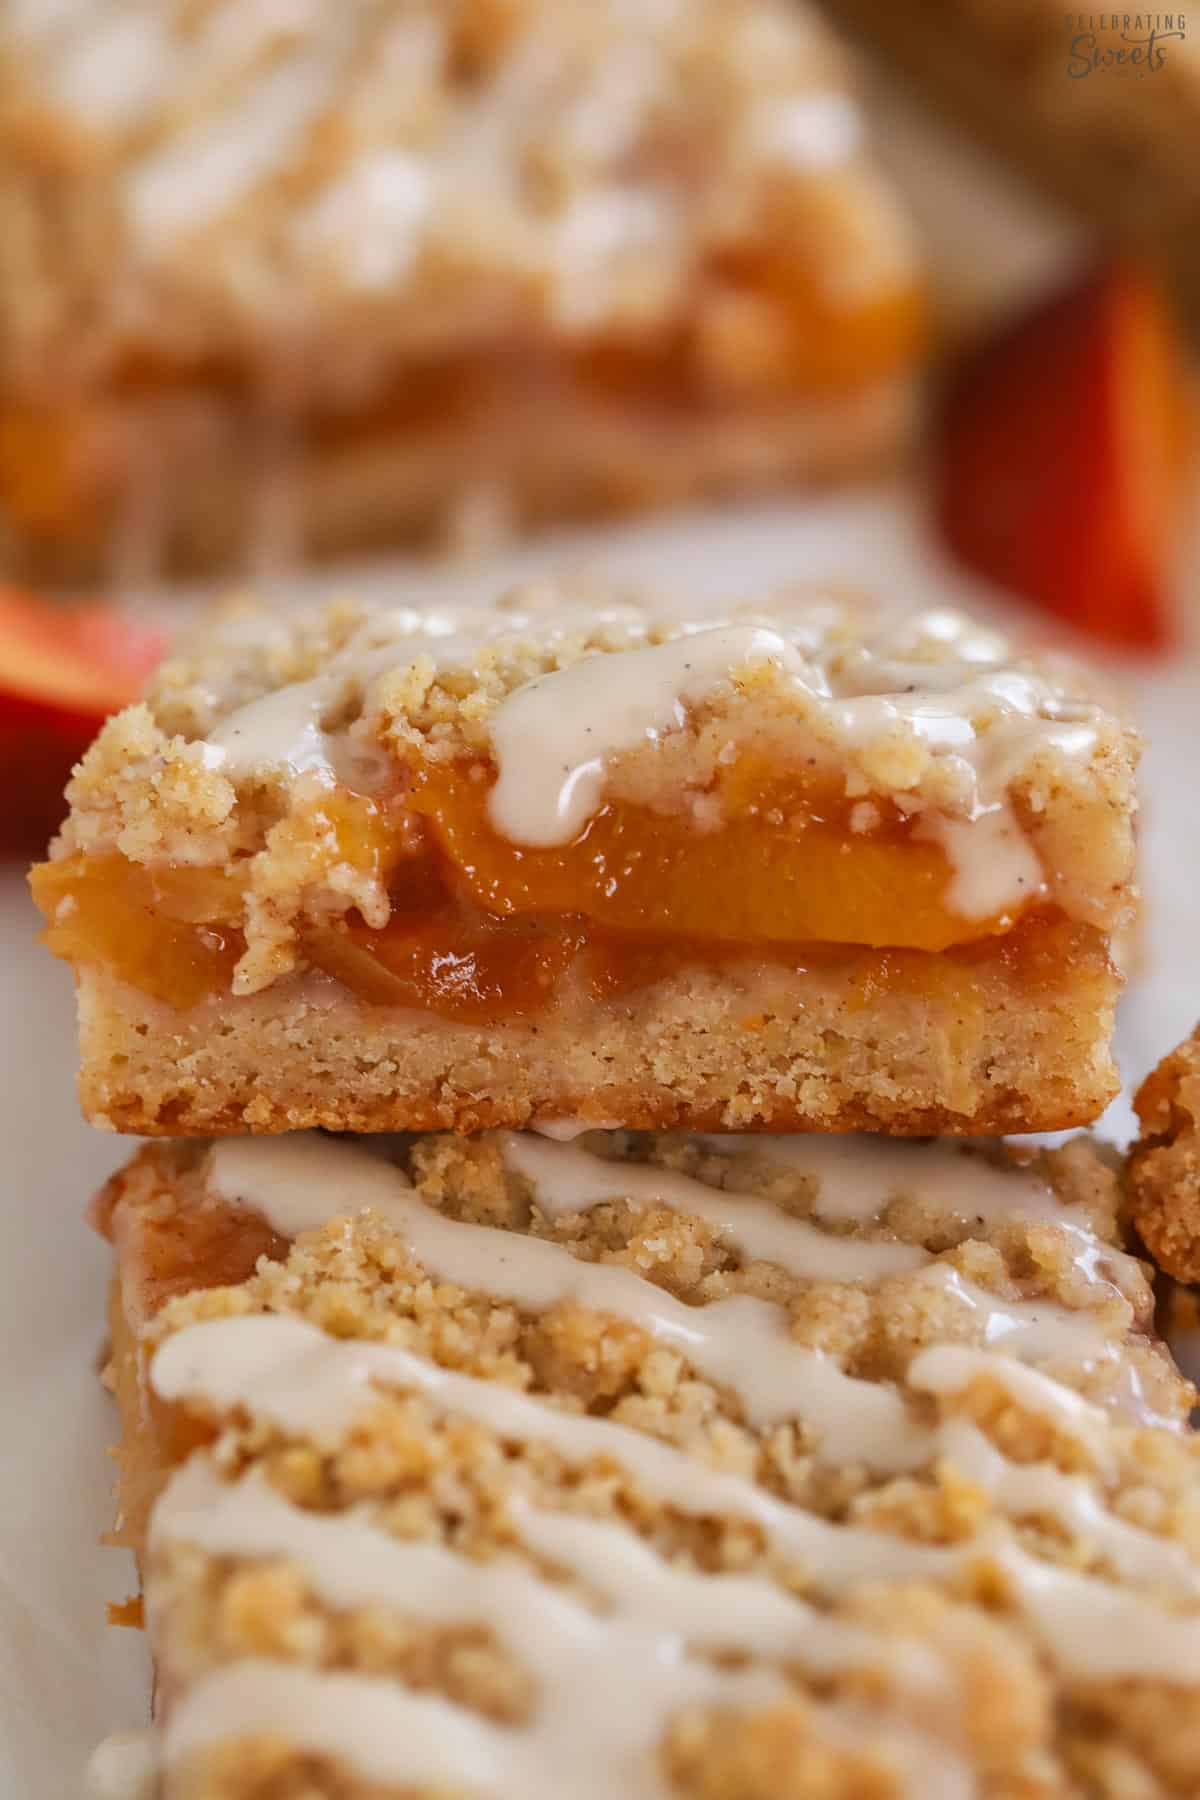 Closeup of a peach bar drizzled with white icing.